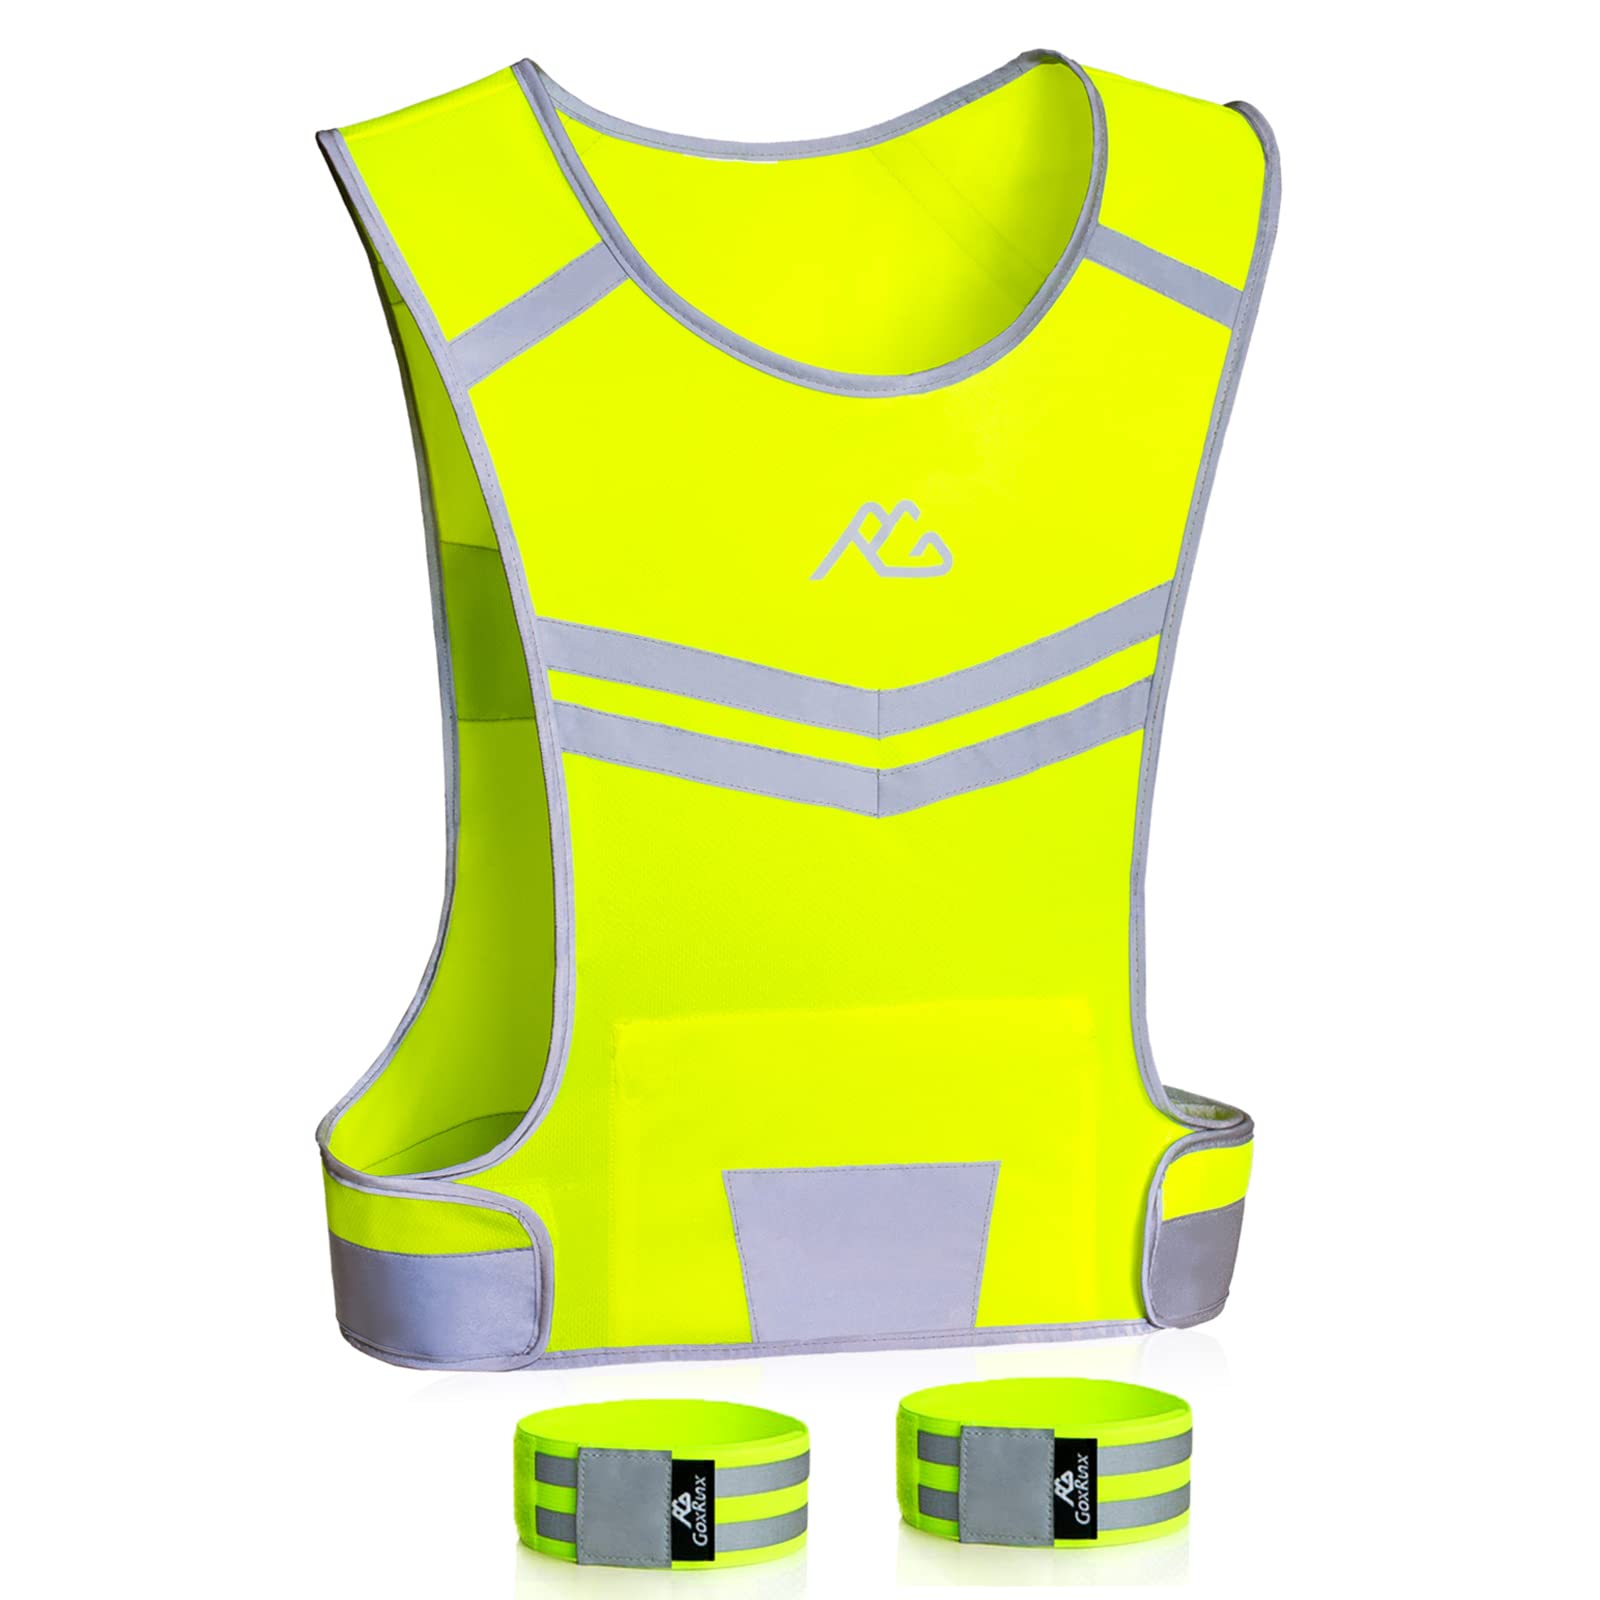 GoxRunx Reflective Running Vest Gear Ultralight & Comfortable Cycling Motorcycle Reflective Vest-Large Zippered Inside Pocket & Adjustable Waist- High Visibility Night Running Safety Vest (Yellow, M)